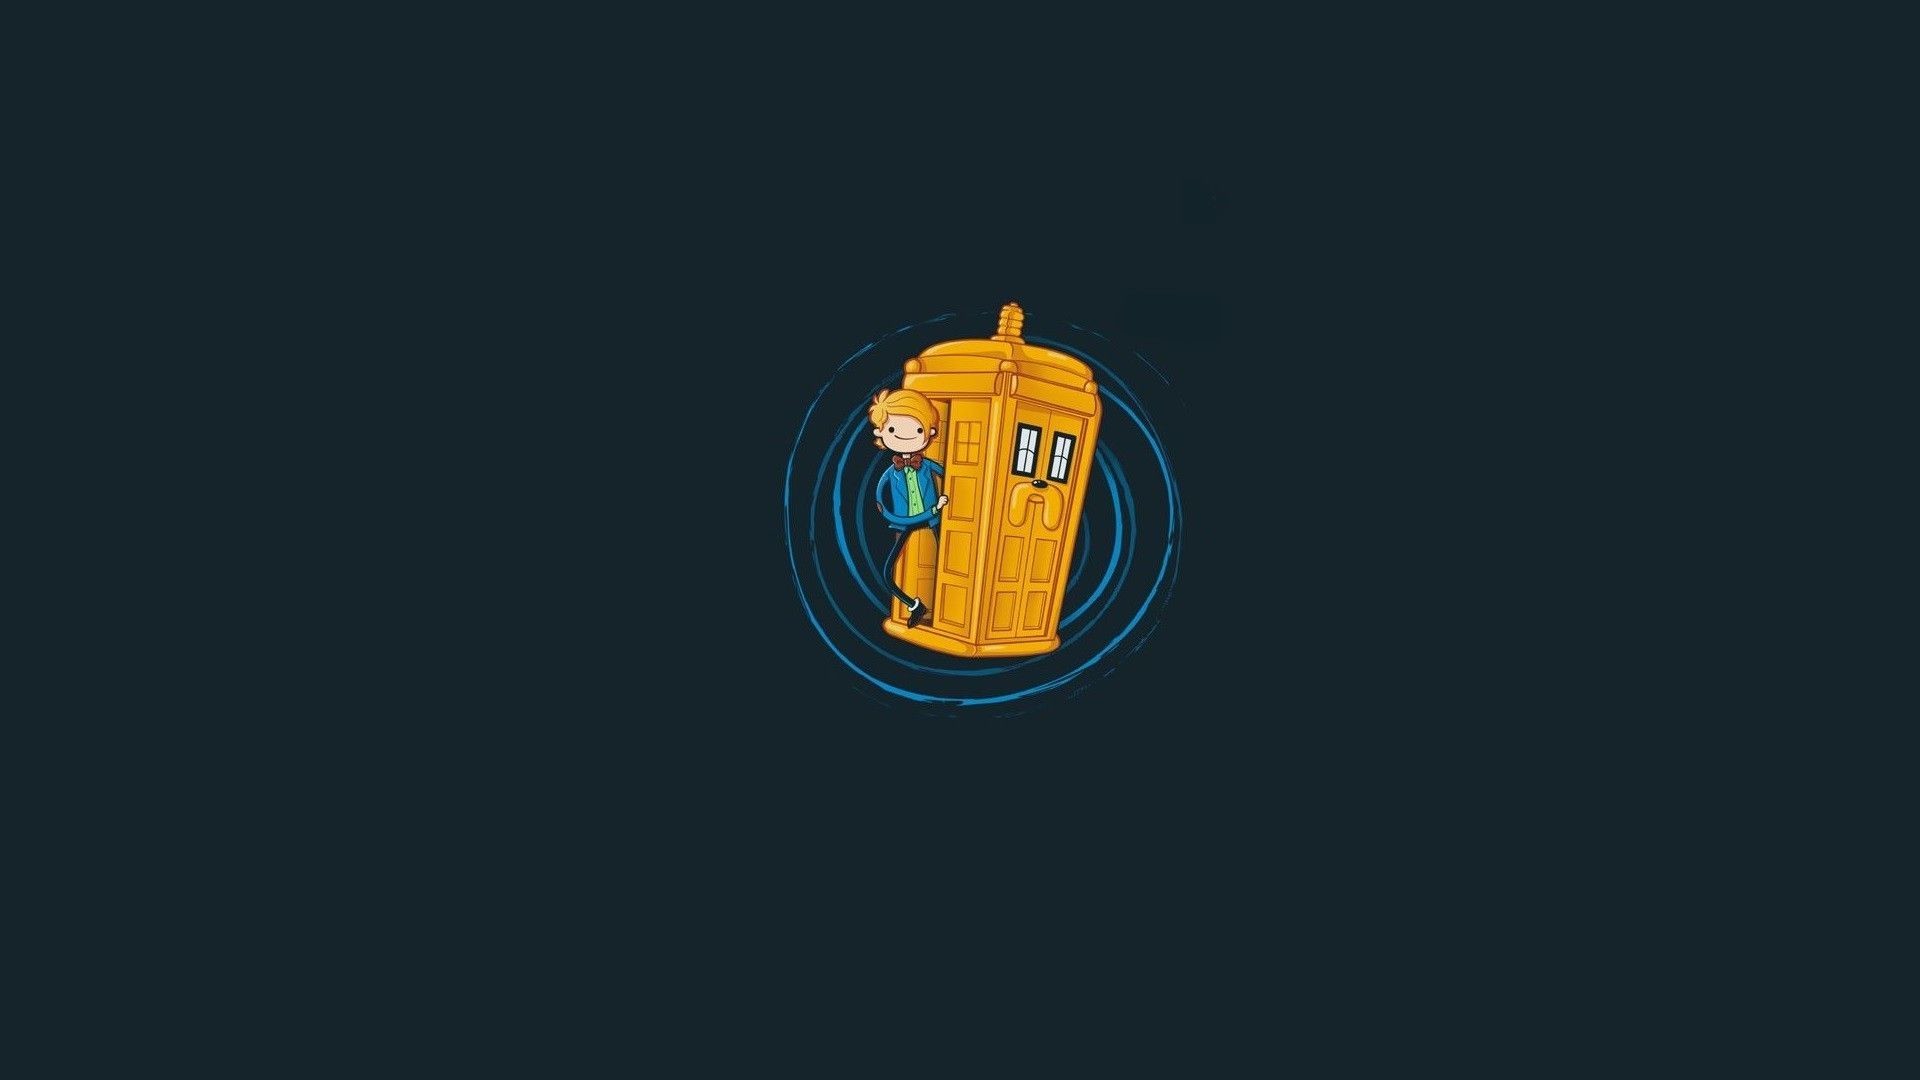 1920x1080 Adventure Time - Doctor Who crossover HD Wallpaper 